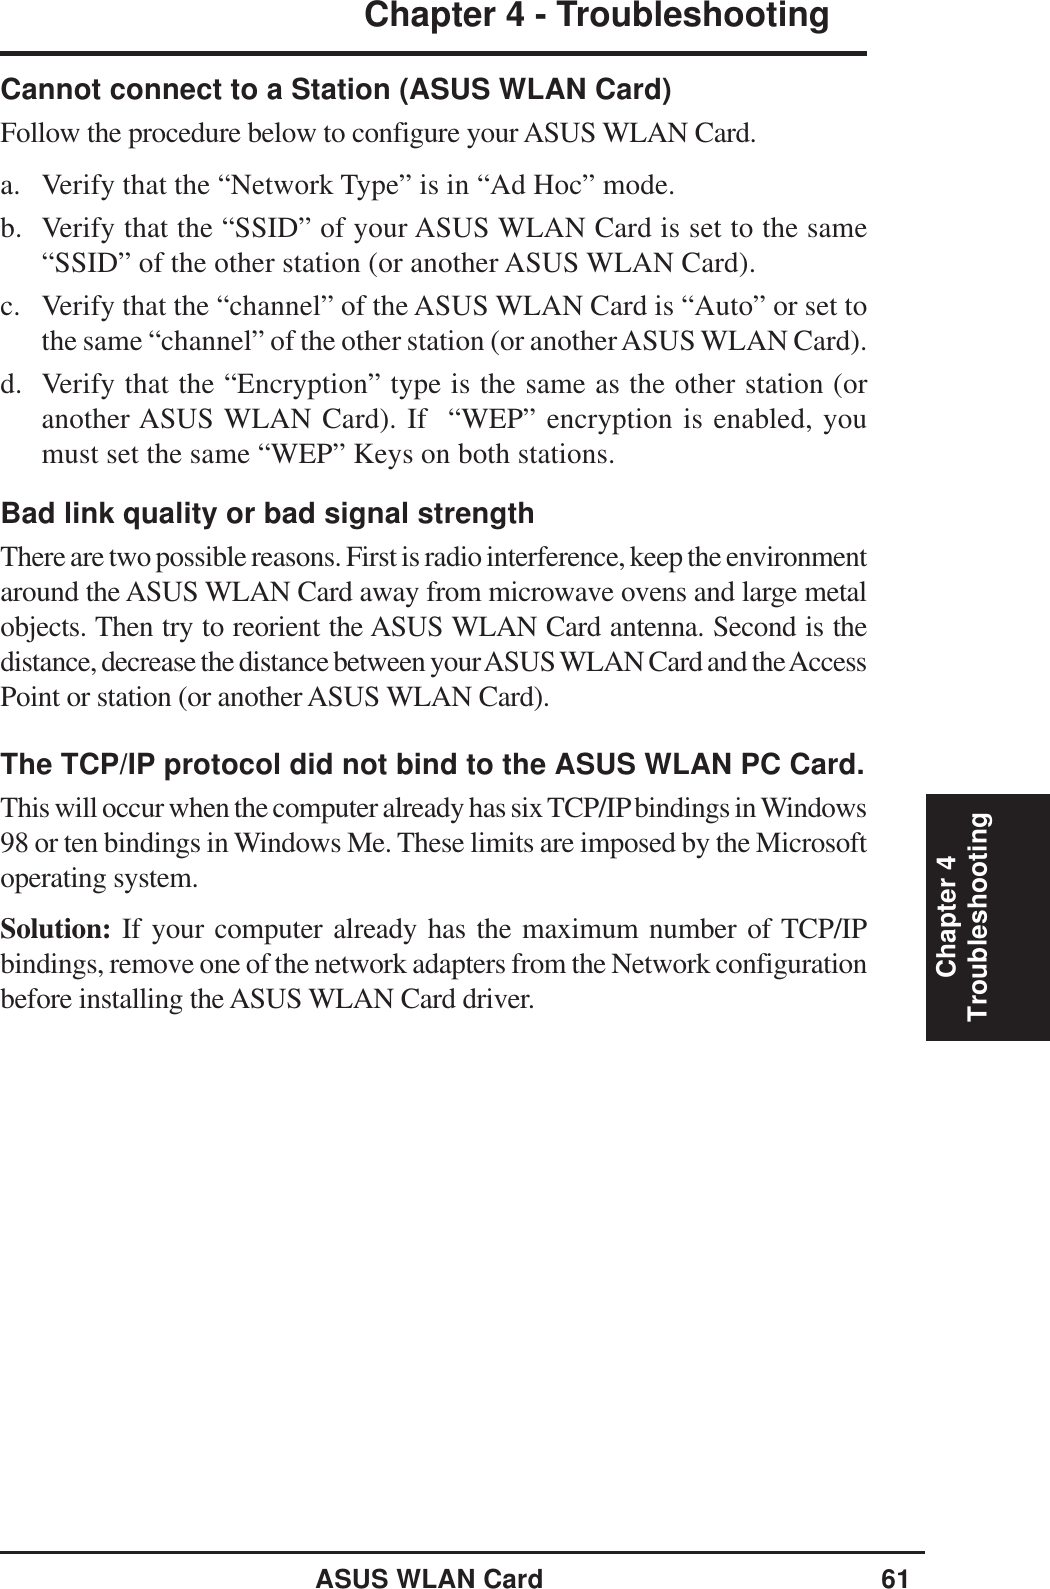 ASUS WLAN Card 61Chapter 4 - TroubleshootingChapter 4TroubleshootingCannot connect to a Station (ASUS WLAN Card)Follow the procedure below to configure your ASUS WLAN Card.a. Verify that the “Network Type” is in “Ad Hoc” mode.b. Verify that the “SSID” of your ASUS WLAN Card is set to the same“SSID” of the other station (or another ASUS WLAN Card).c. Verify that the “channel” of the ASUS WLAN Card is “Auto” or set tothe same “channel” of the other station (or another ASUS WLAN Card).d. Verify that the “Encryption” type is the same as the other station (oranother ASUS WLAN Card). If  “WEP” encryption is enabled, youmust set the same “WEP” Keys on both stations.Bad link quality or bad signal strengthThere are two possible reasons. First is radio interference, keep the environmentaround the ASUS WLAN Card away from microwave ovens and large metalobjects. Then try to reorient the ASUS WLAN Card antenna. Second is thedistance, decrease the distance between your ASUS WLAN Card and the AccessPoint or station (or another ASUS WLAN Card).The TCP/IP protocol did not bind to the ASUS WLAN PC Card.This will occur when the computer already has six TCP/IP bindings in Windows98 or ten bindings in Windows Me. These limits are imposed by the Microsoftoperating system.Solution: If your computer already has the maximum number of TCP/IPbindings, remove one of the network adapters from the Network configurationbefore installing the ASUS WLAN Card driver.